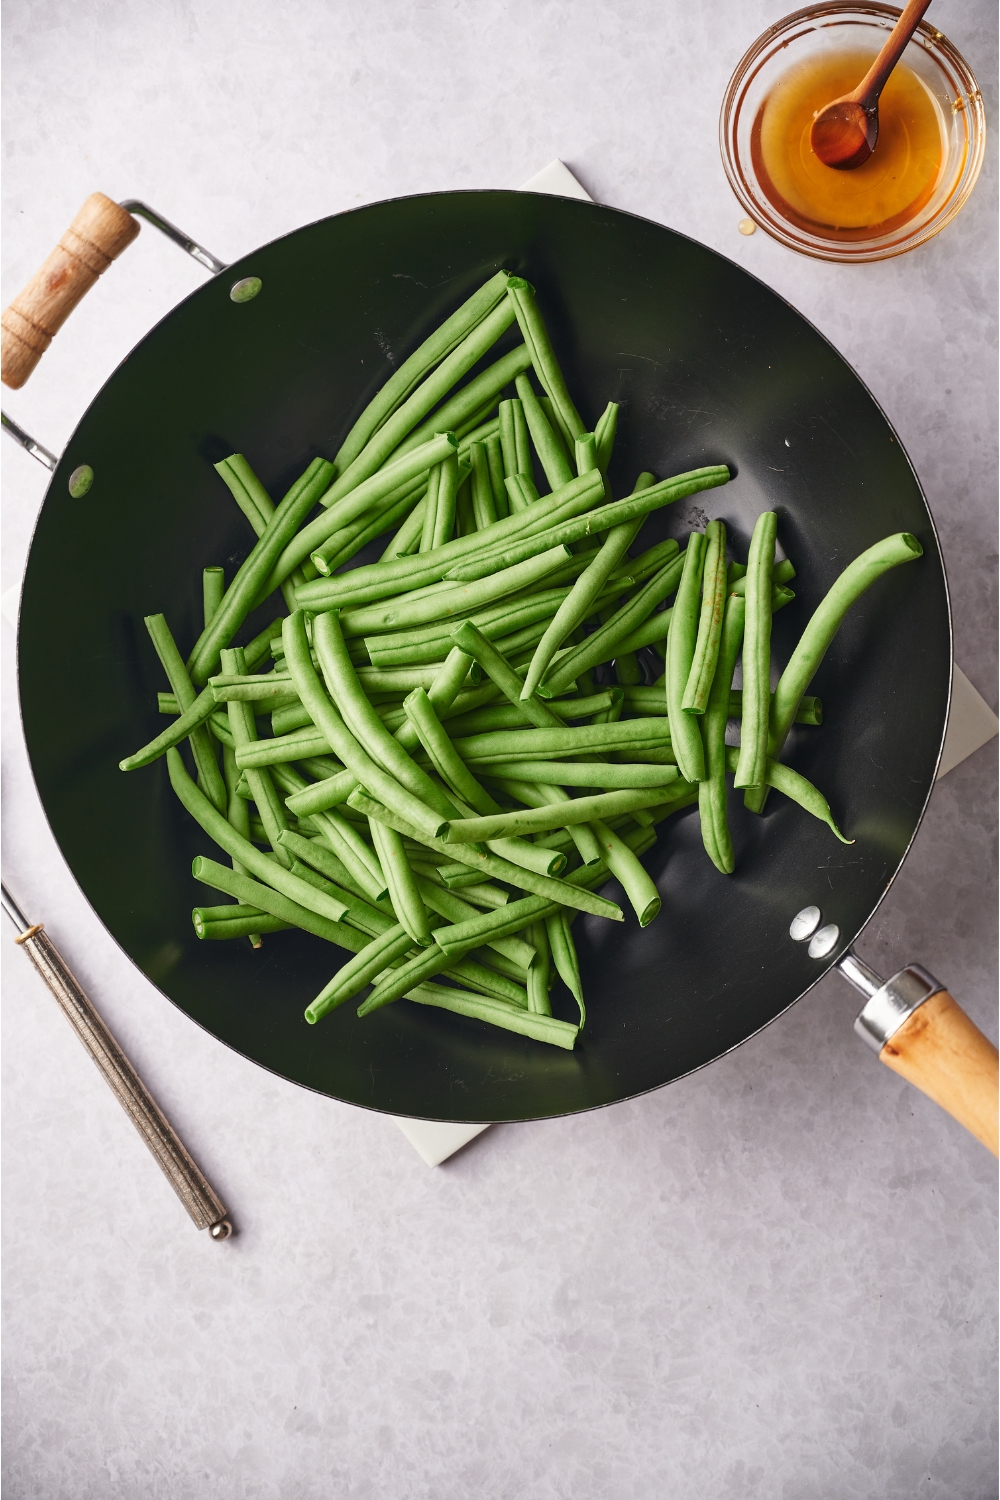 A black skillet filled with raw green beans. Next to the skillet is a small bowl of honey.